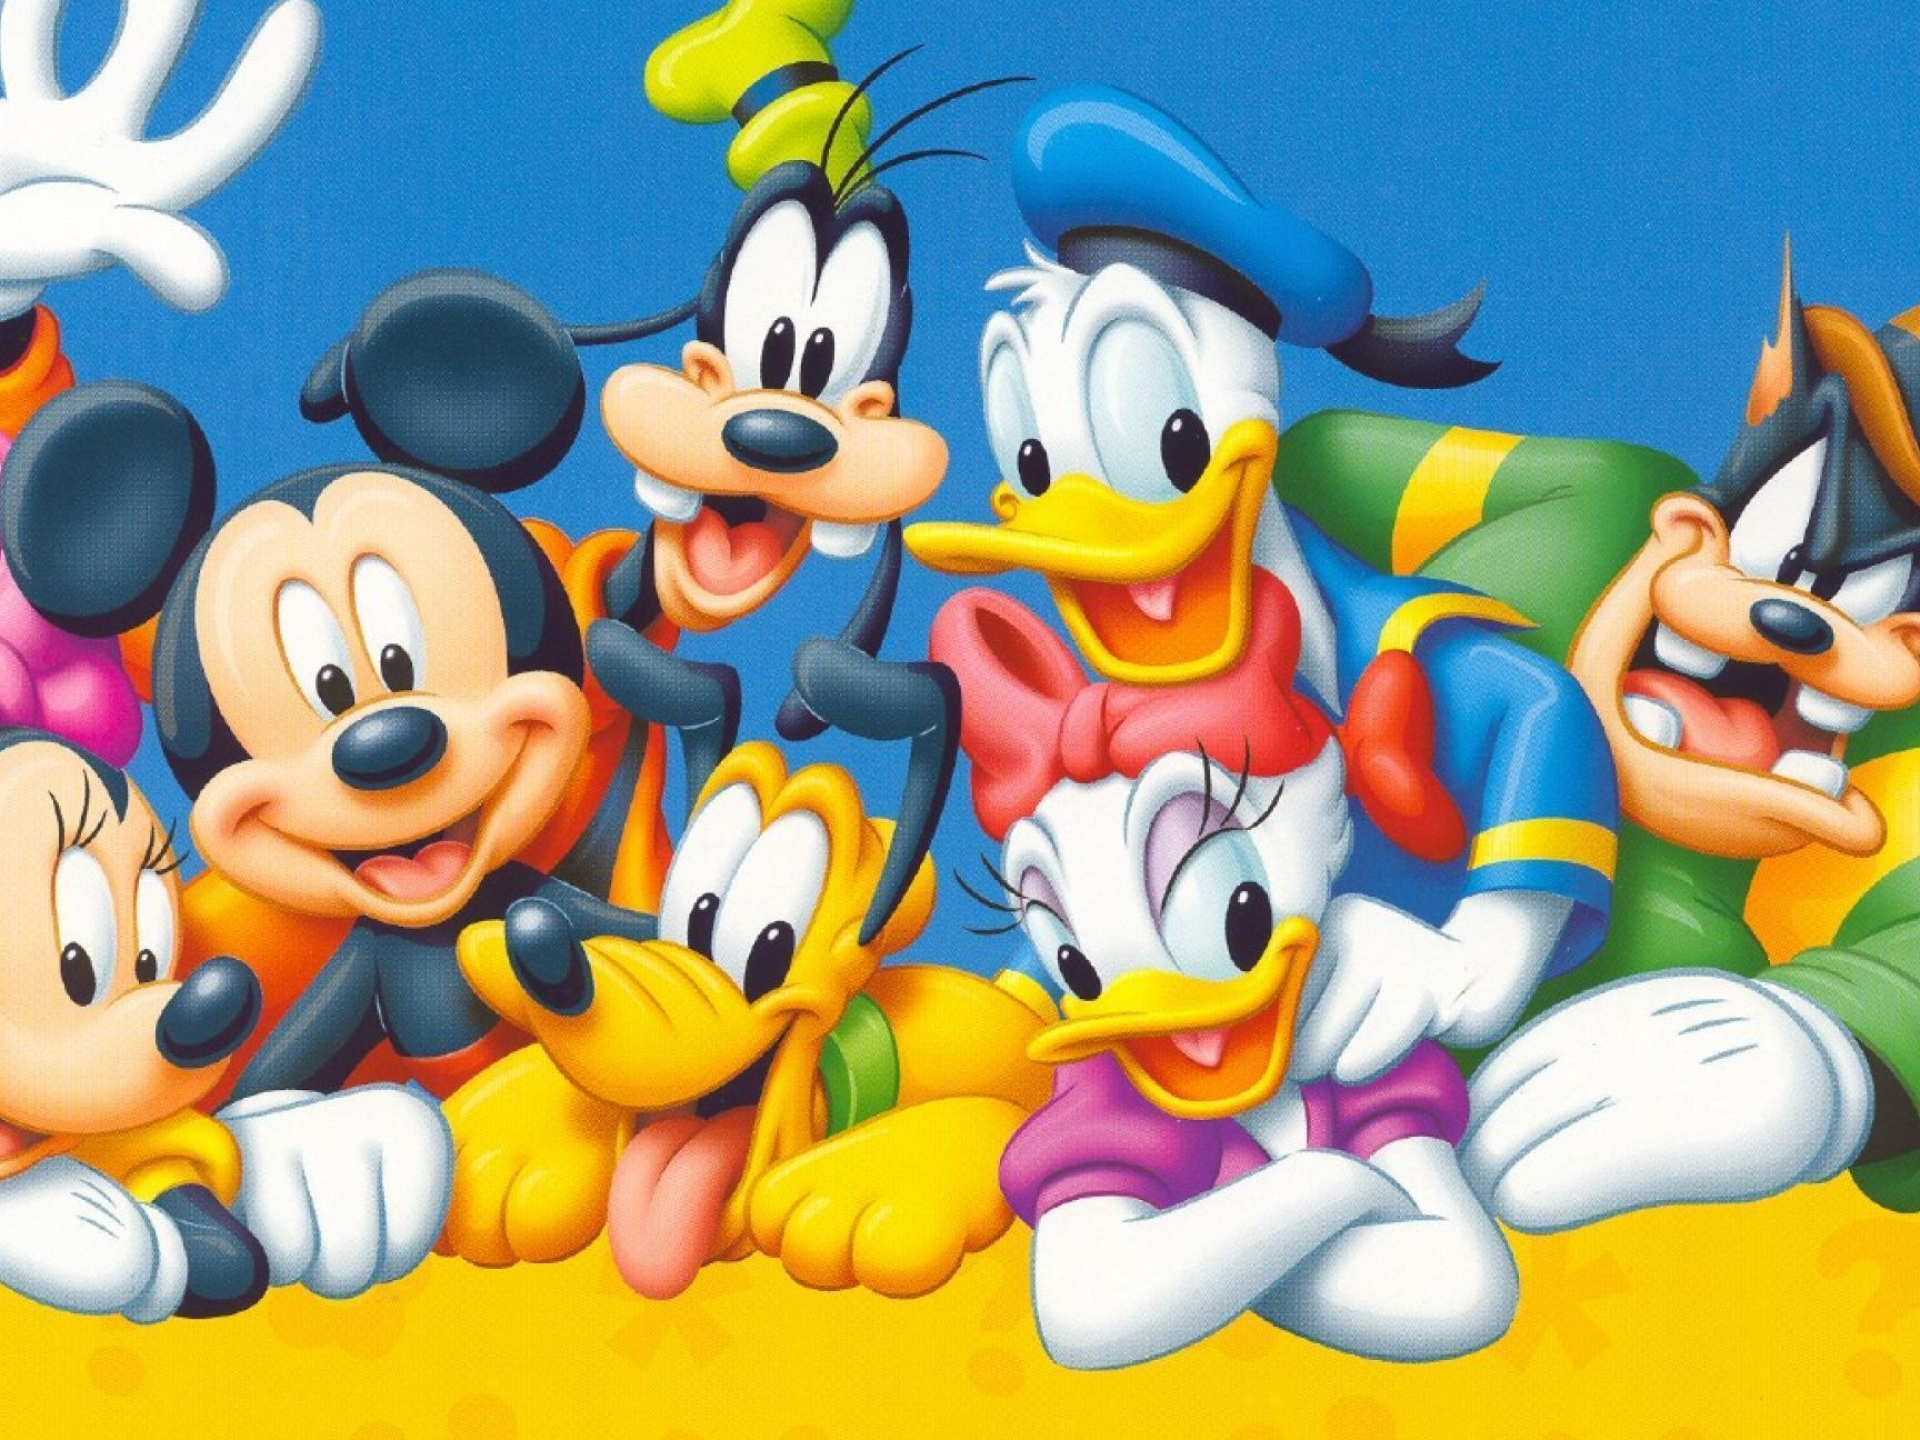 Donald Duck: Created to be the special companion of Mickey Mouse, The most popular cartoon characters. 1920x1440 HD Background.